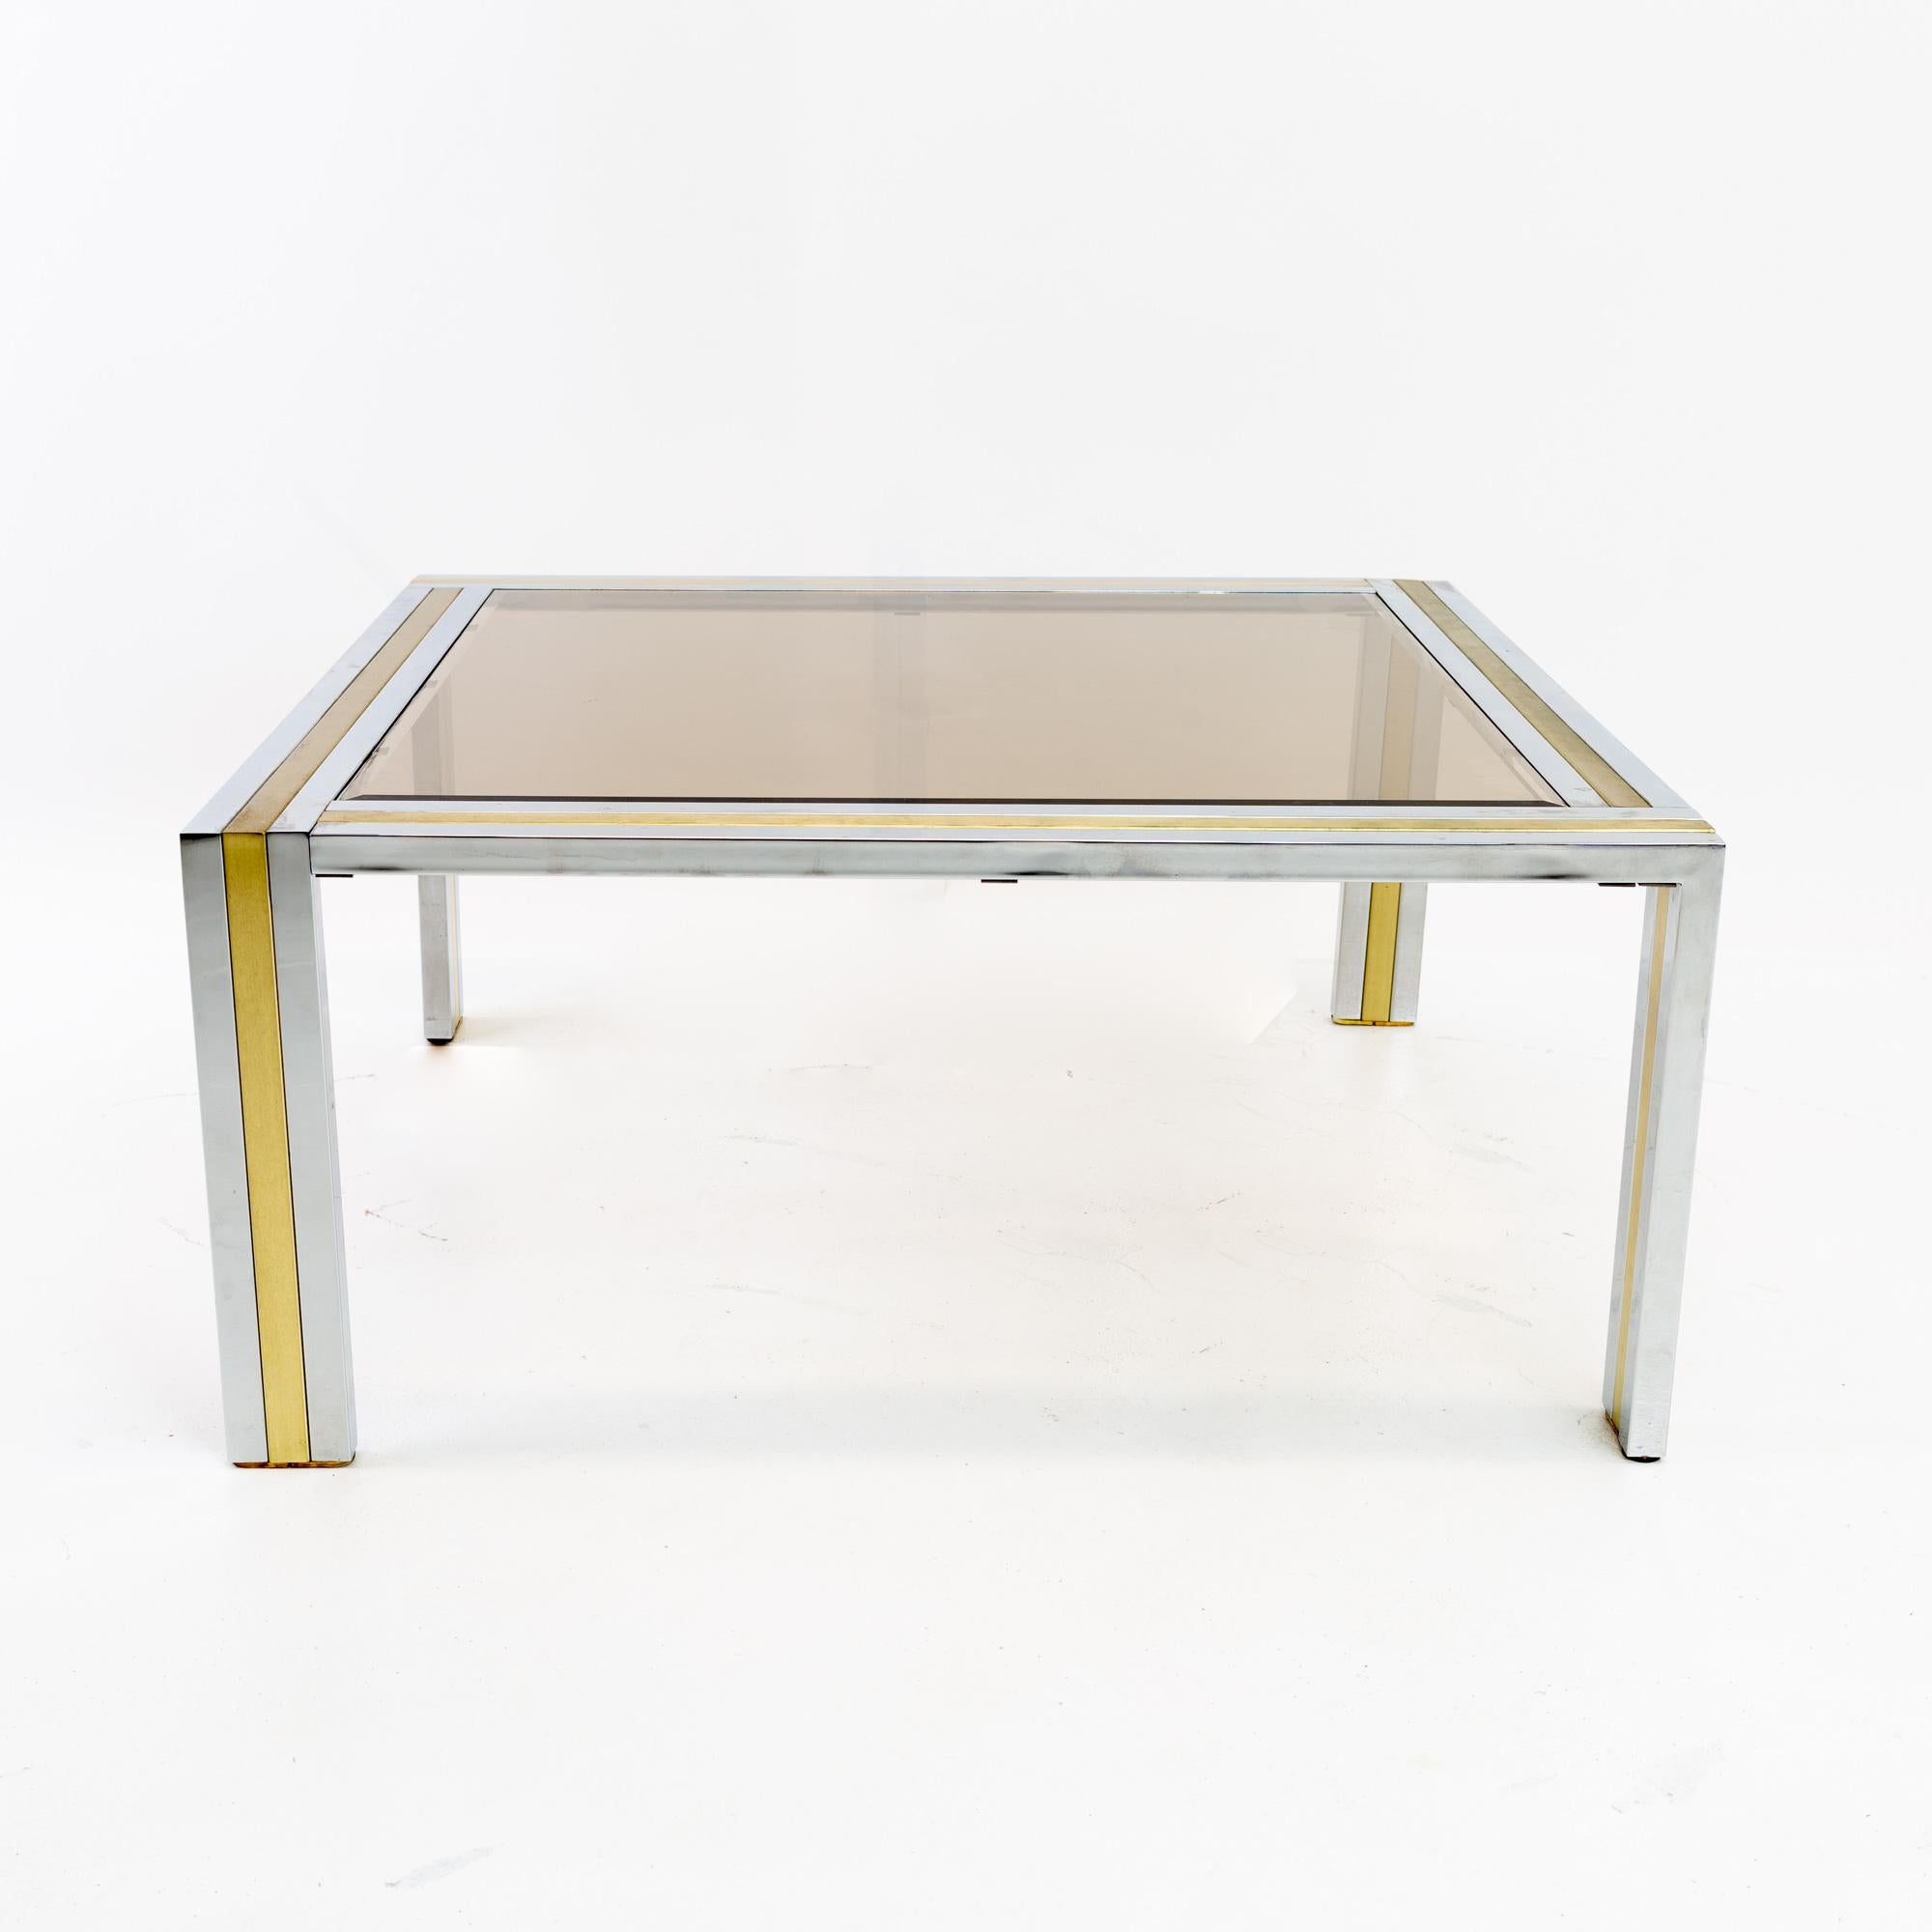 Renato Zevi Italian Mid Century chrome brass and glass square coffee table
This table is 36 wide x 36 deep x 16 inches high

This price includes getting this piece in what we call restored vintage condition. That means the piece is permanently fixed